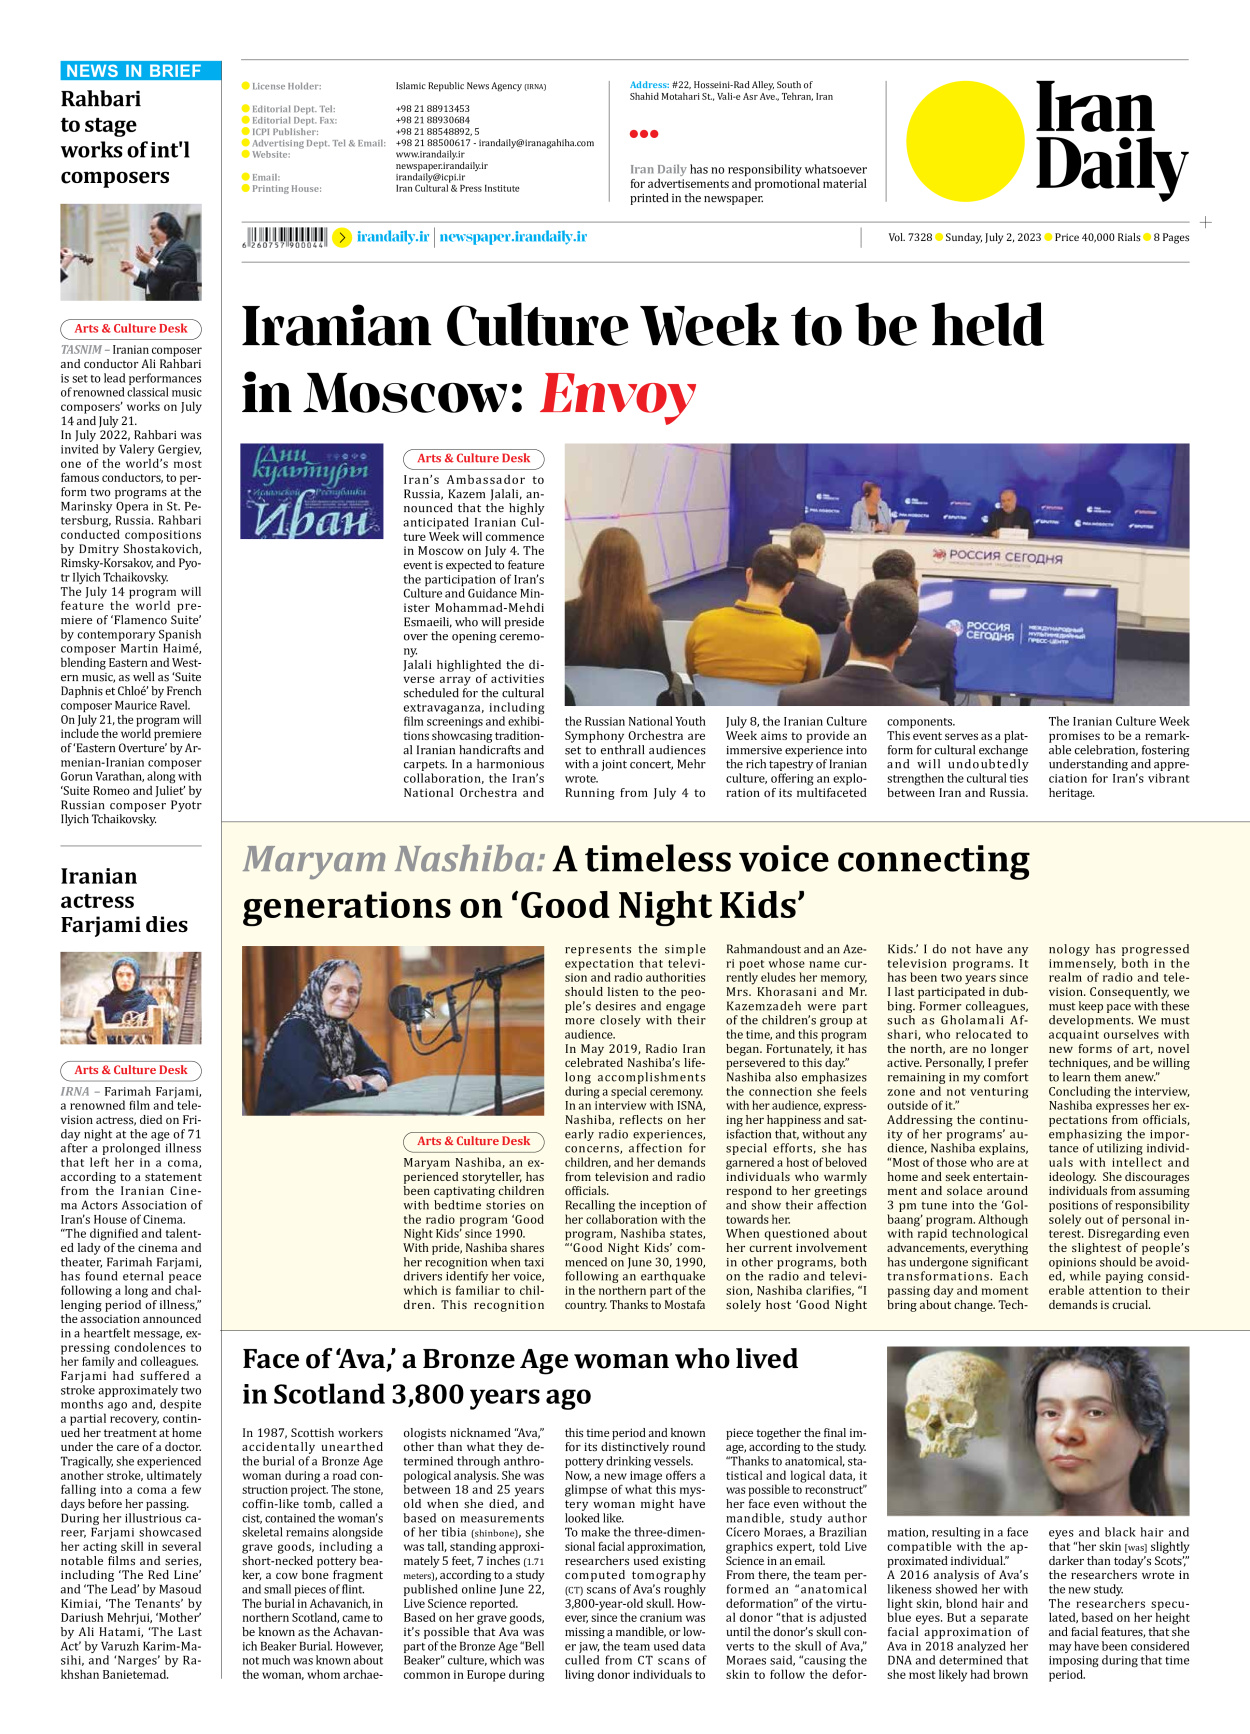 Iran Daily - Number Seven Thousand Three Hundred and Twenty Eight - 02 July 2023 - Page 8